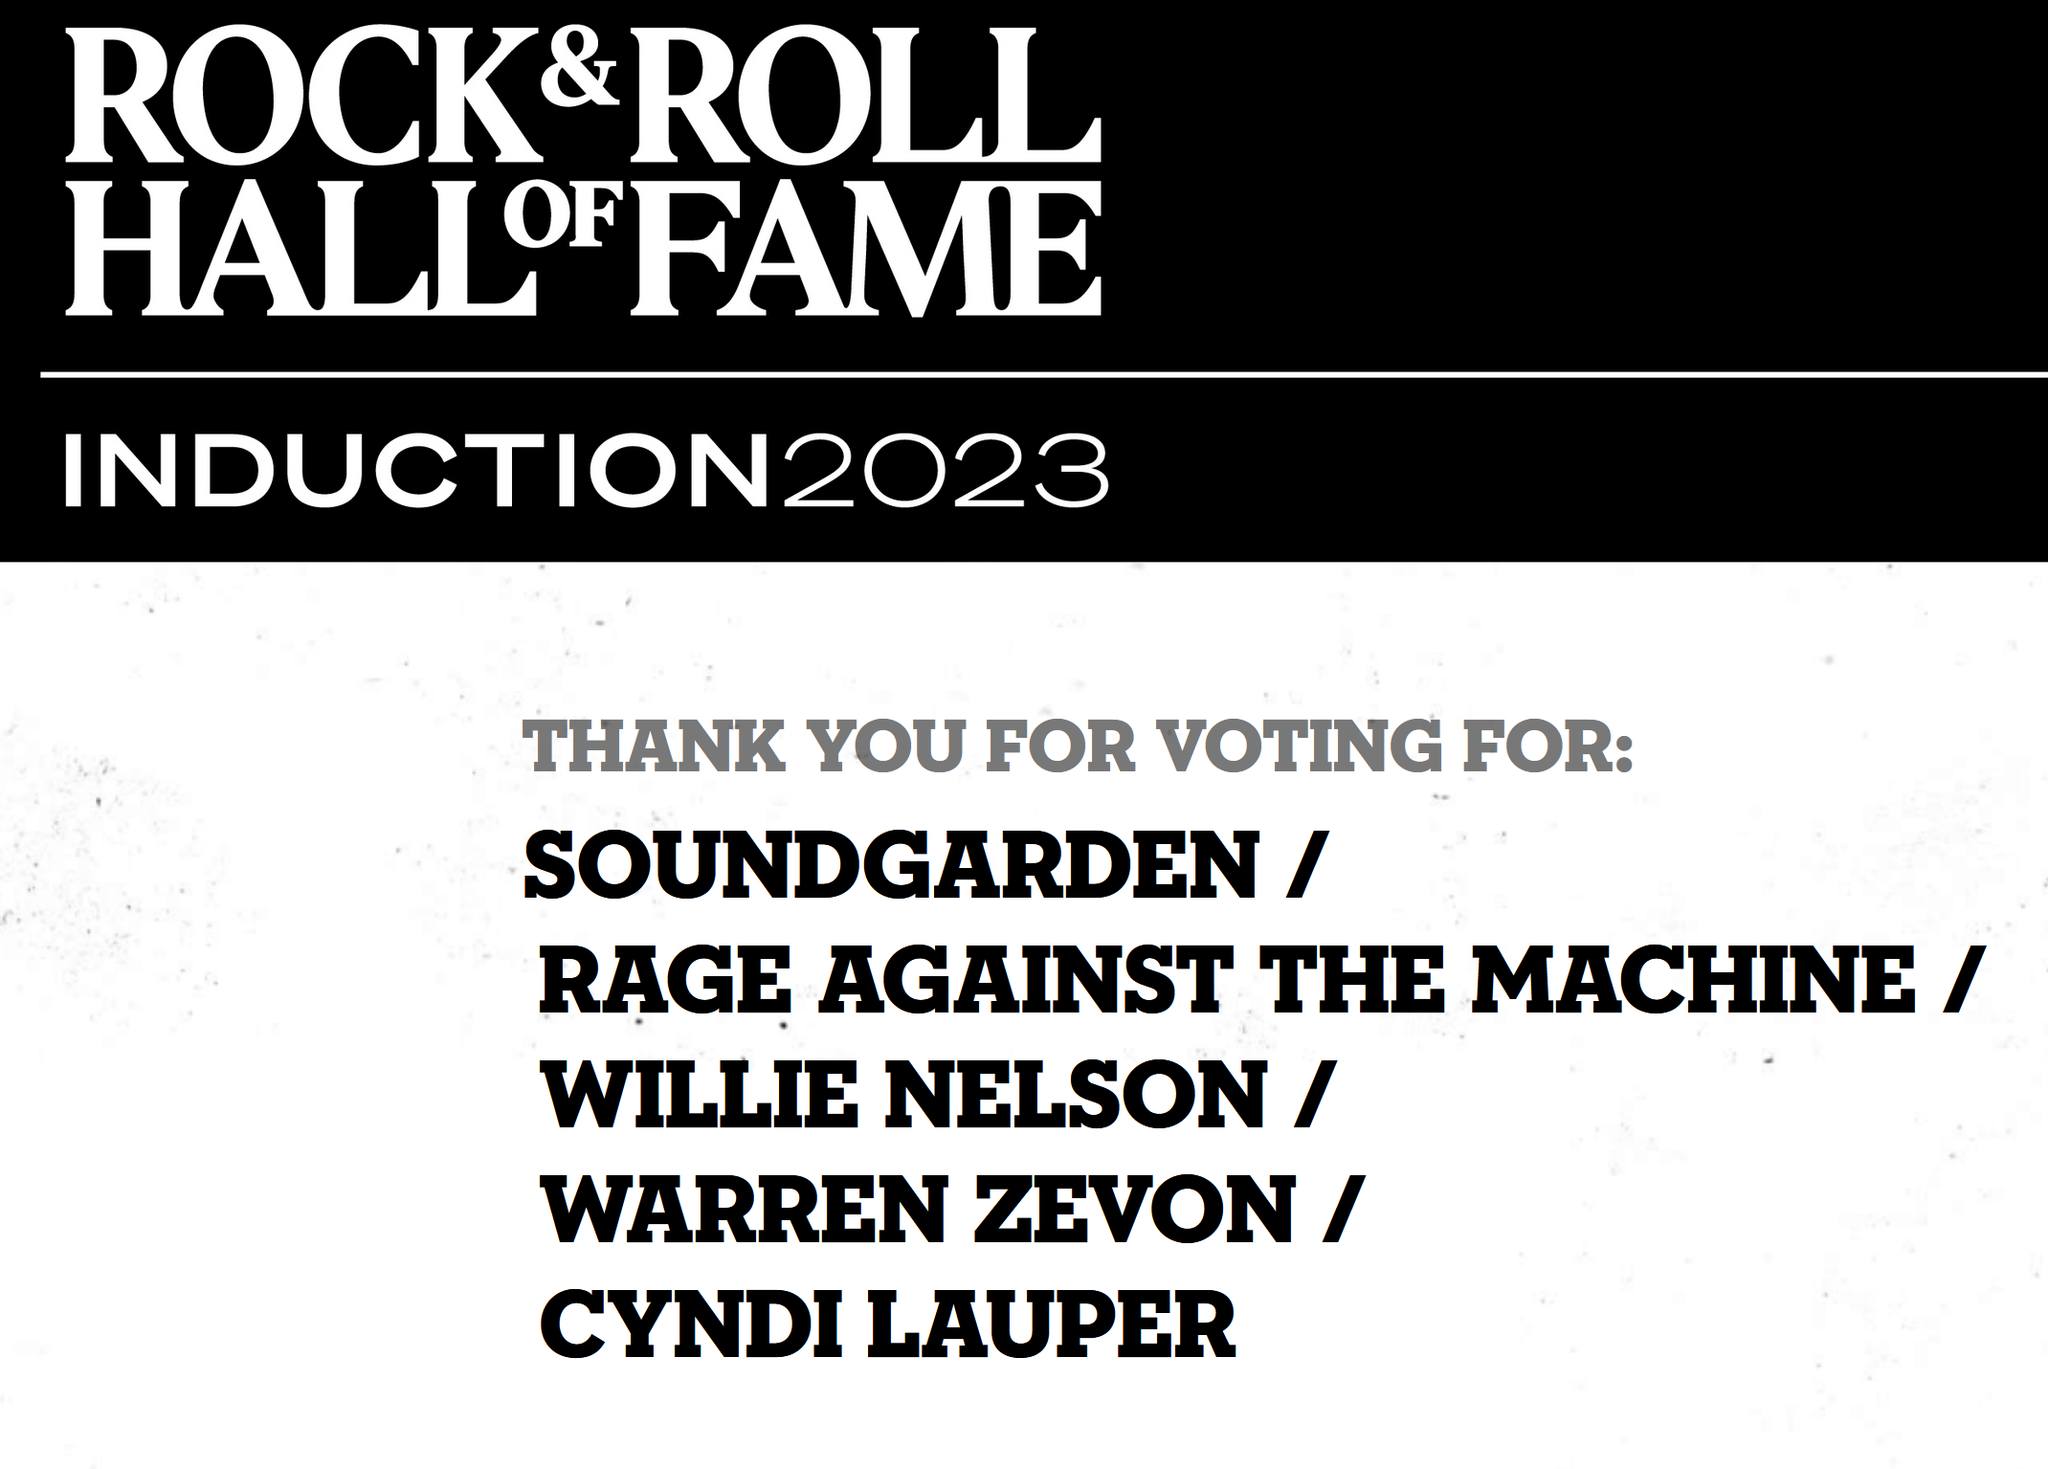 Screenshot of Rock & Roll Hall of Fame Fan Vote 2023 Ballot showing votes for Soundgarden, Rage Against The Machine, Willie Nelson, Warren Zevon, and Cyndi Lauper